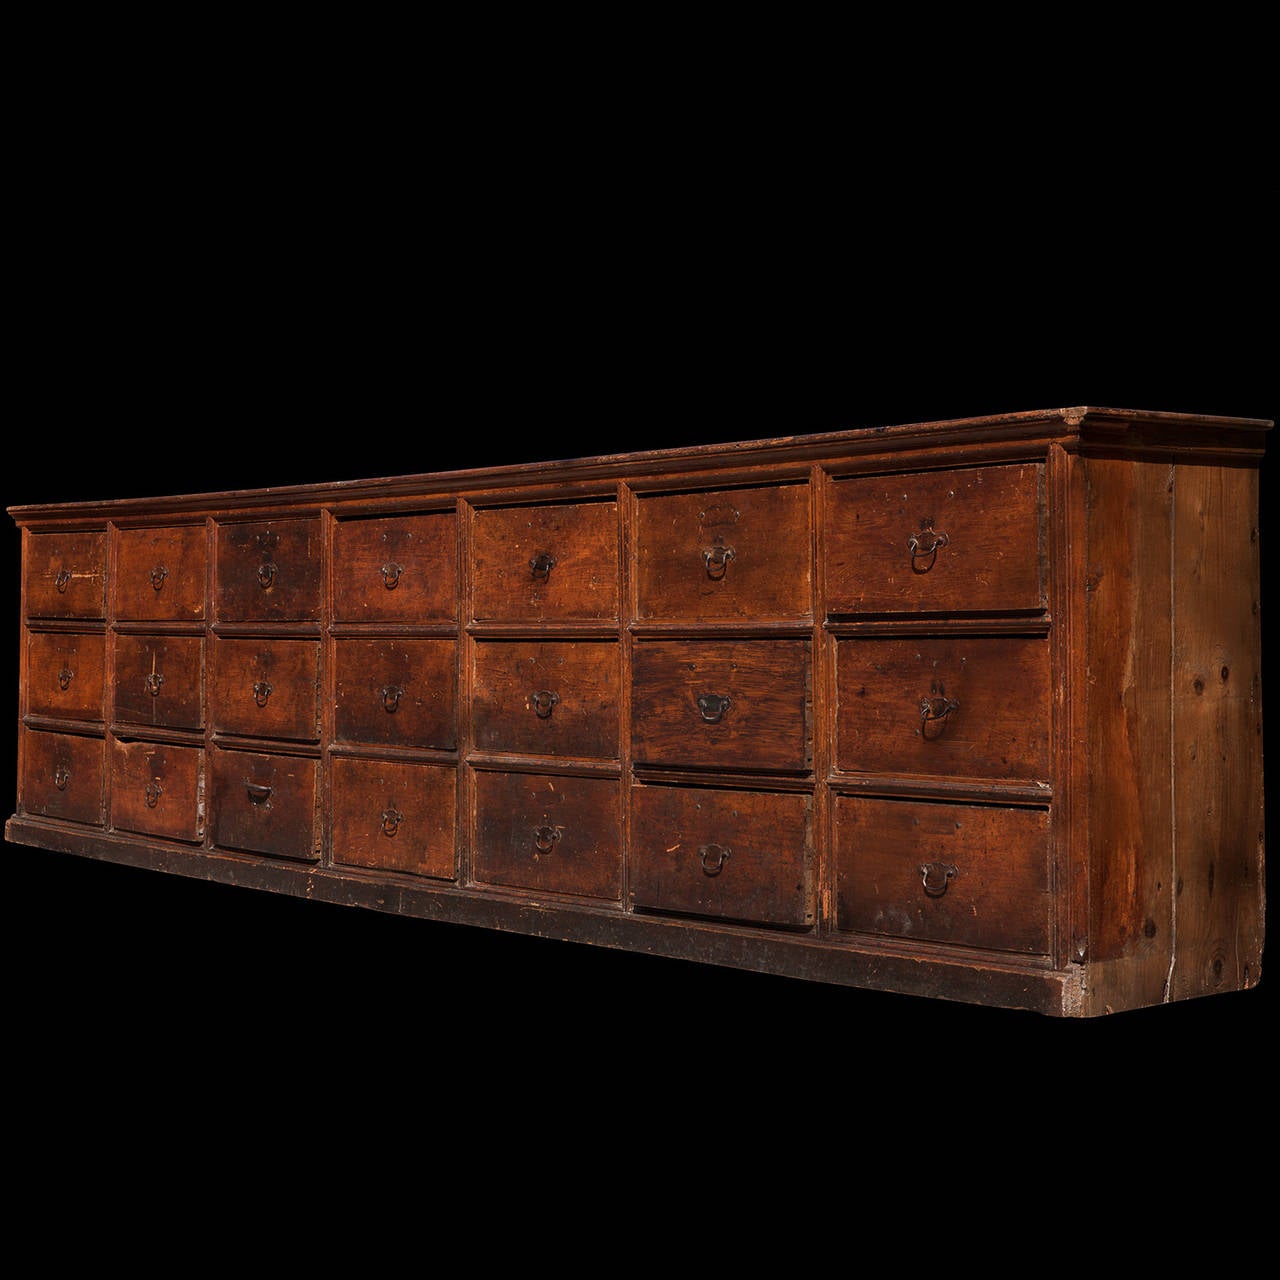 Stained Monumental Haberdashery Shelving Unit with Chest of Drawers